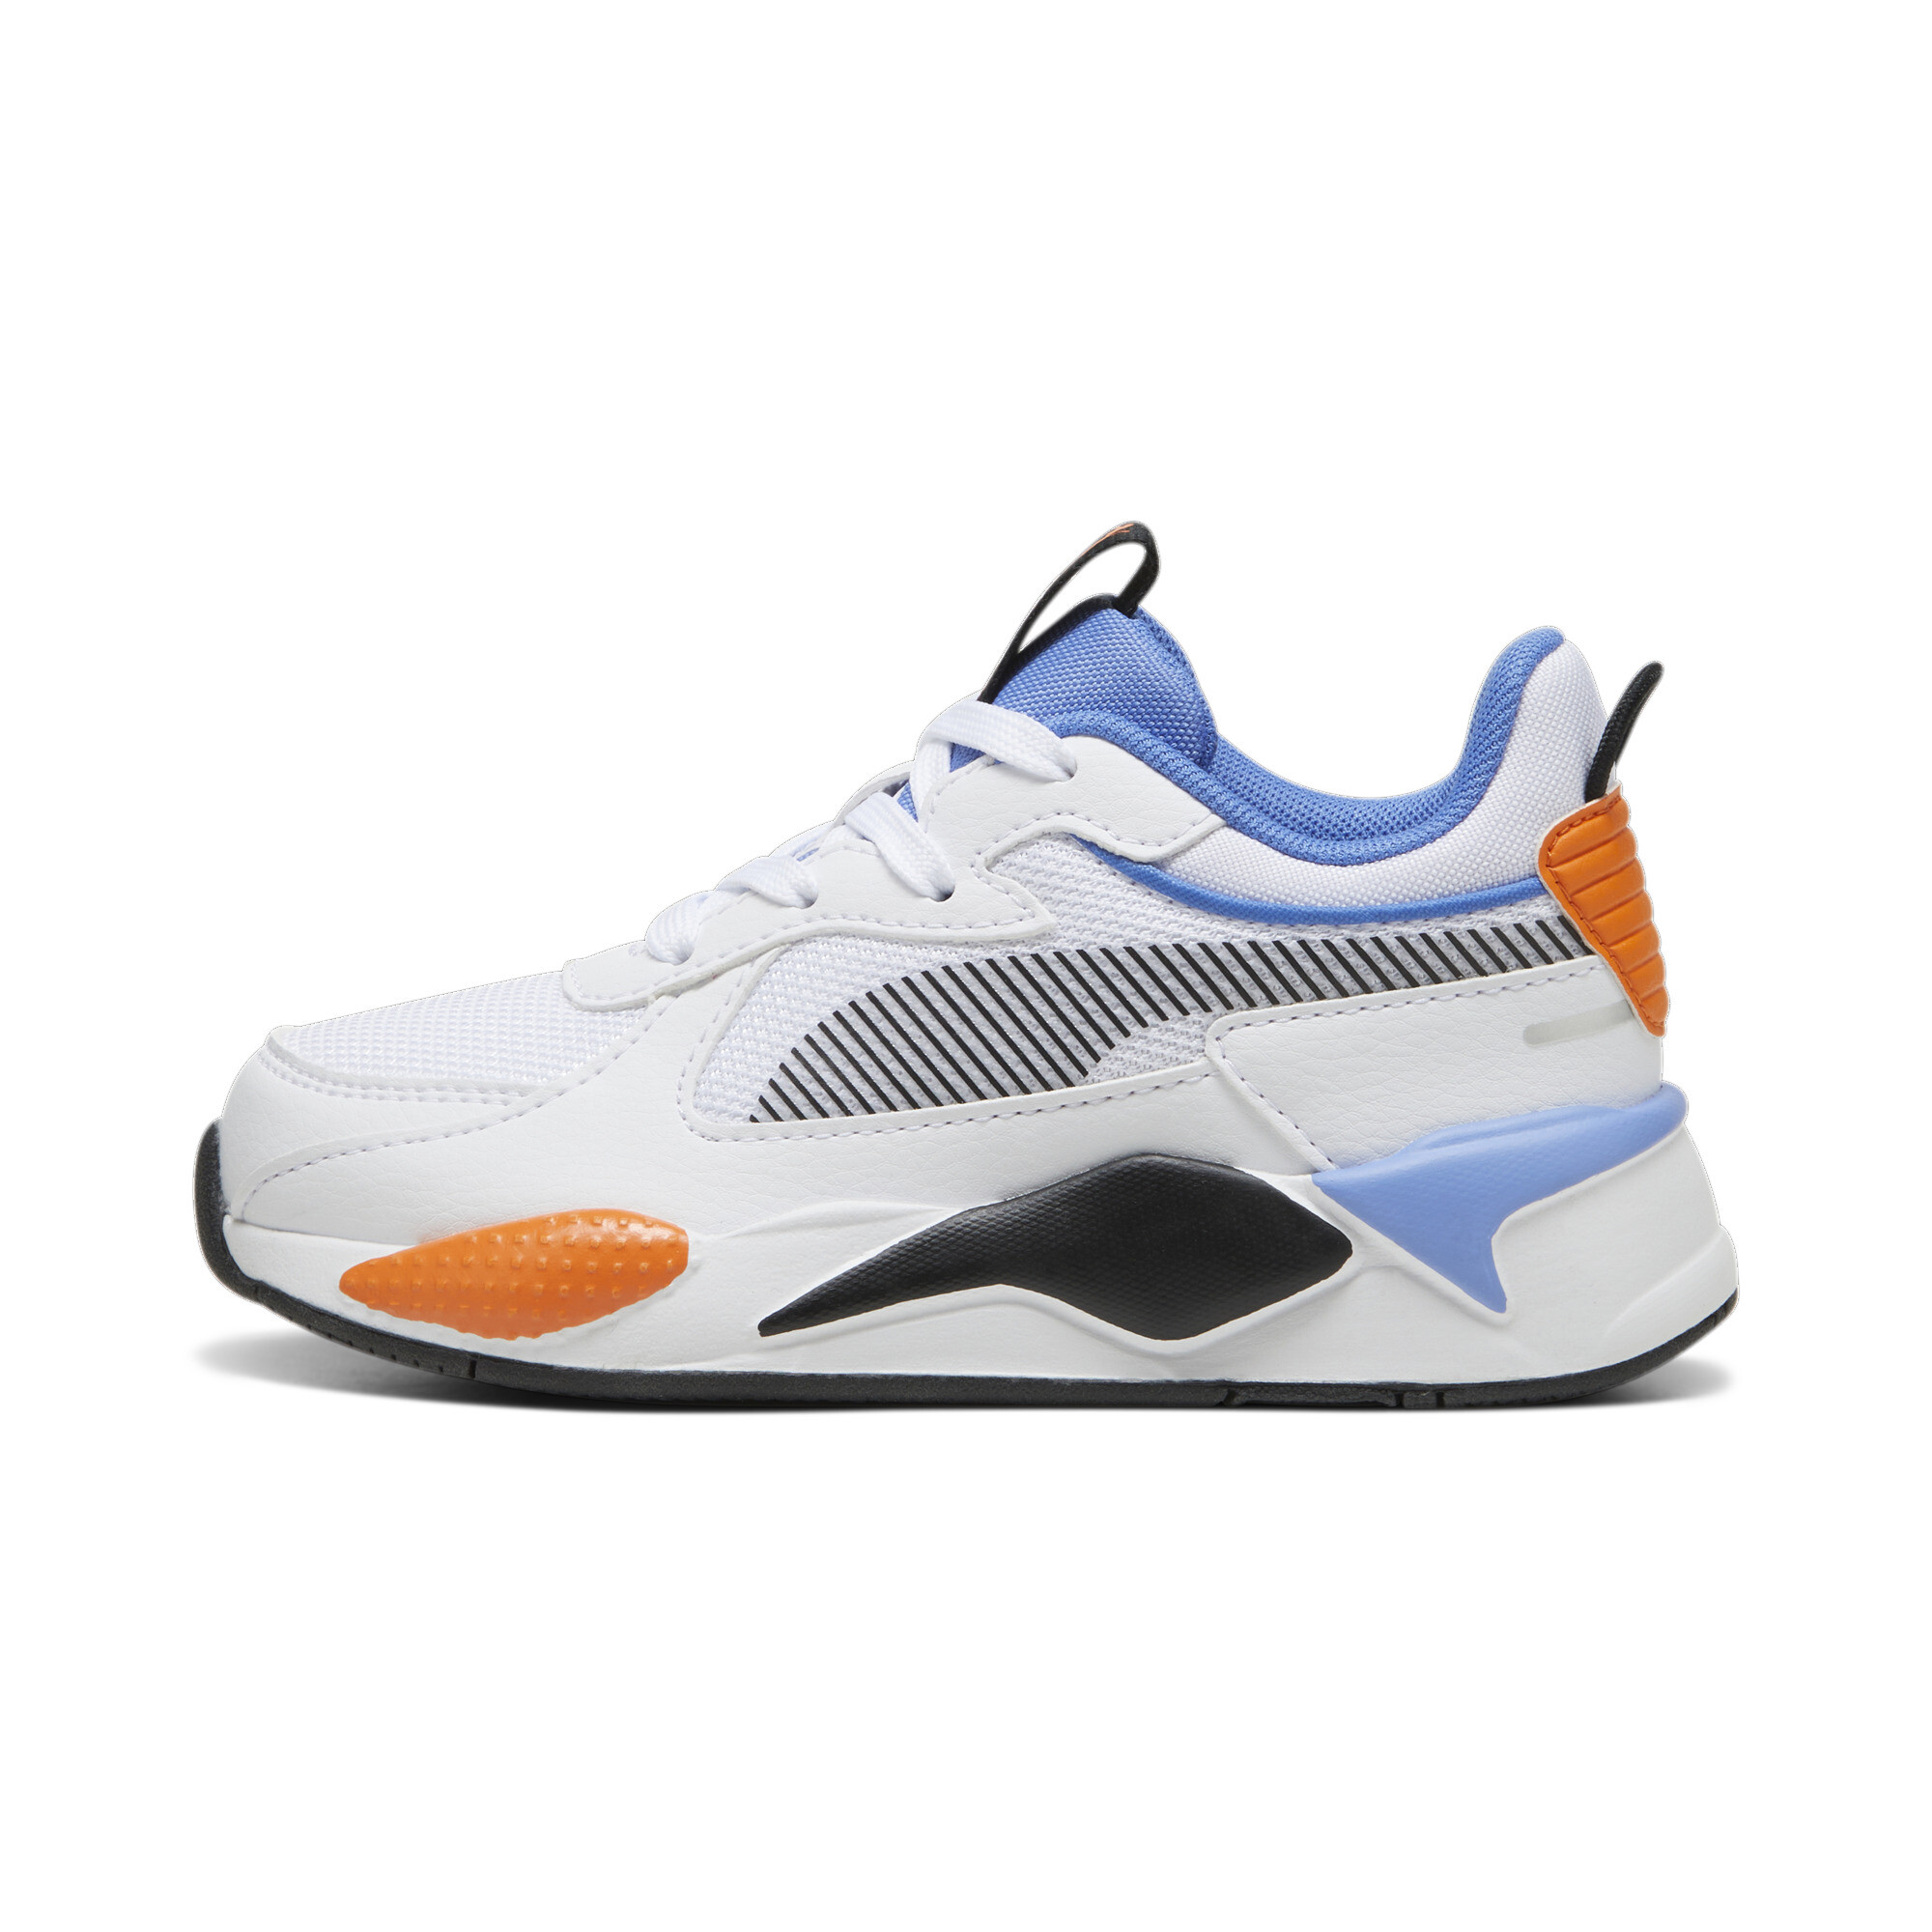 Puma RS-X Kids' Sneakers, White, Size 31, Shoes